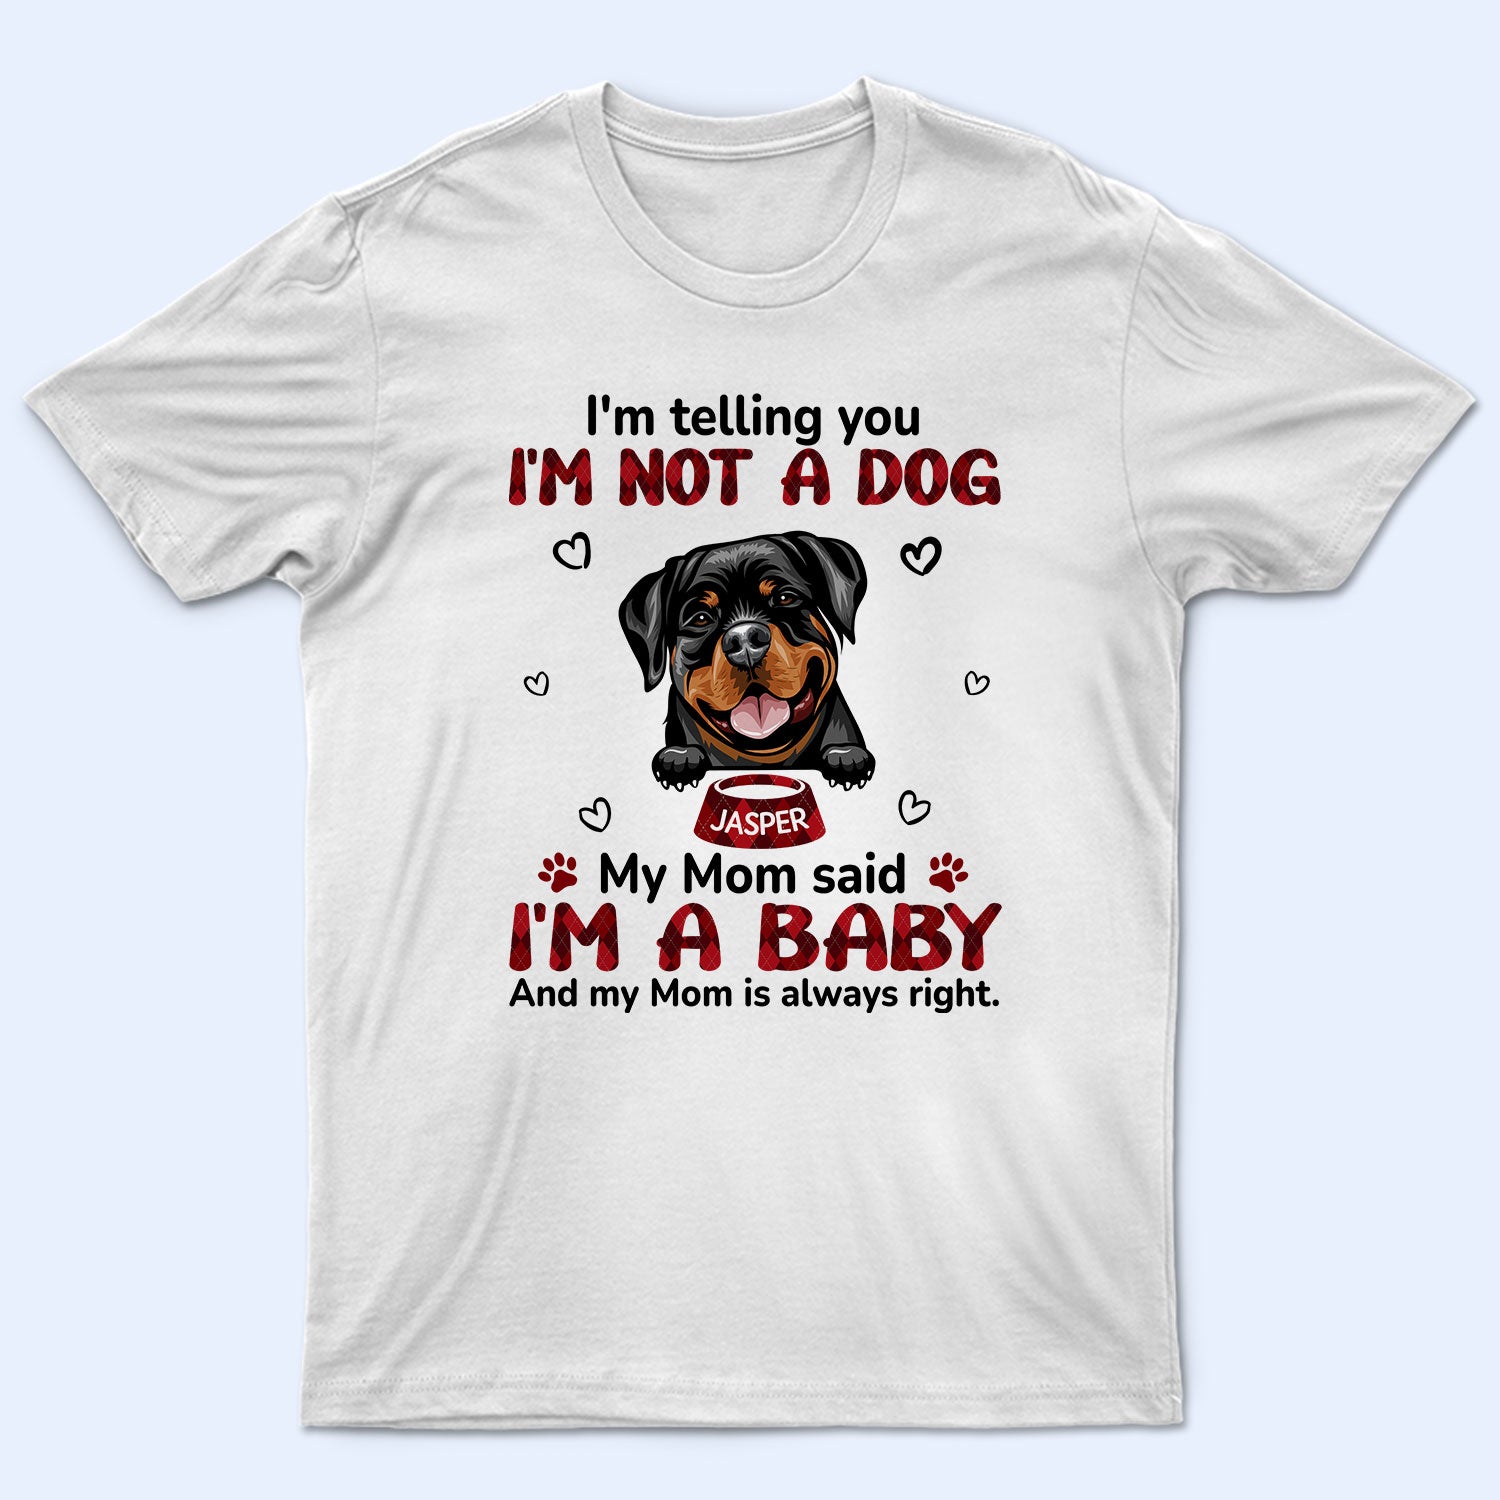 My Mom Said I‘m A Baby - Birthday, Loving, Funny, Gift For Dog Mom, Cat Mom, Cat Dad, Dog Dad, Pet Lover - Personalized Custom T Shirt